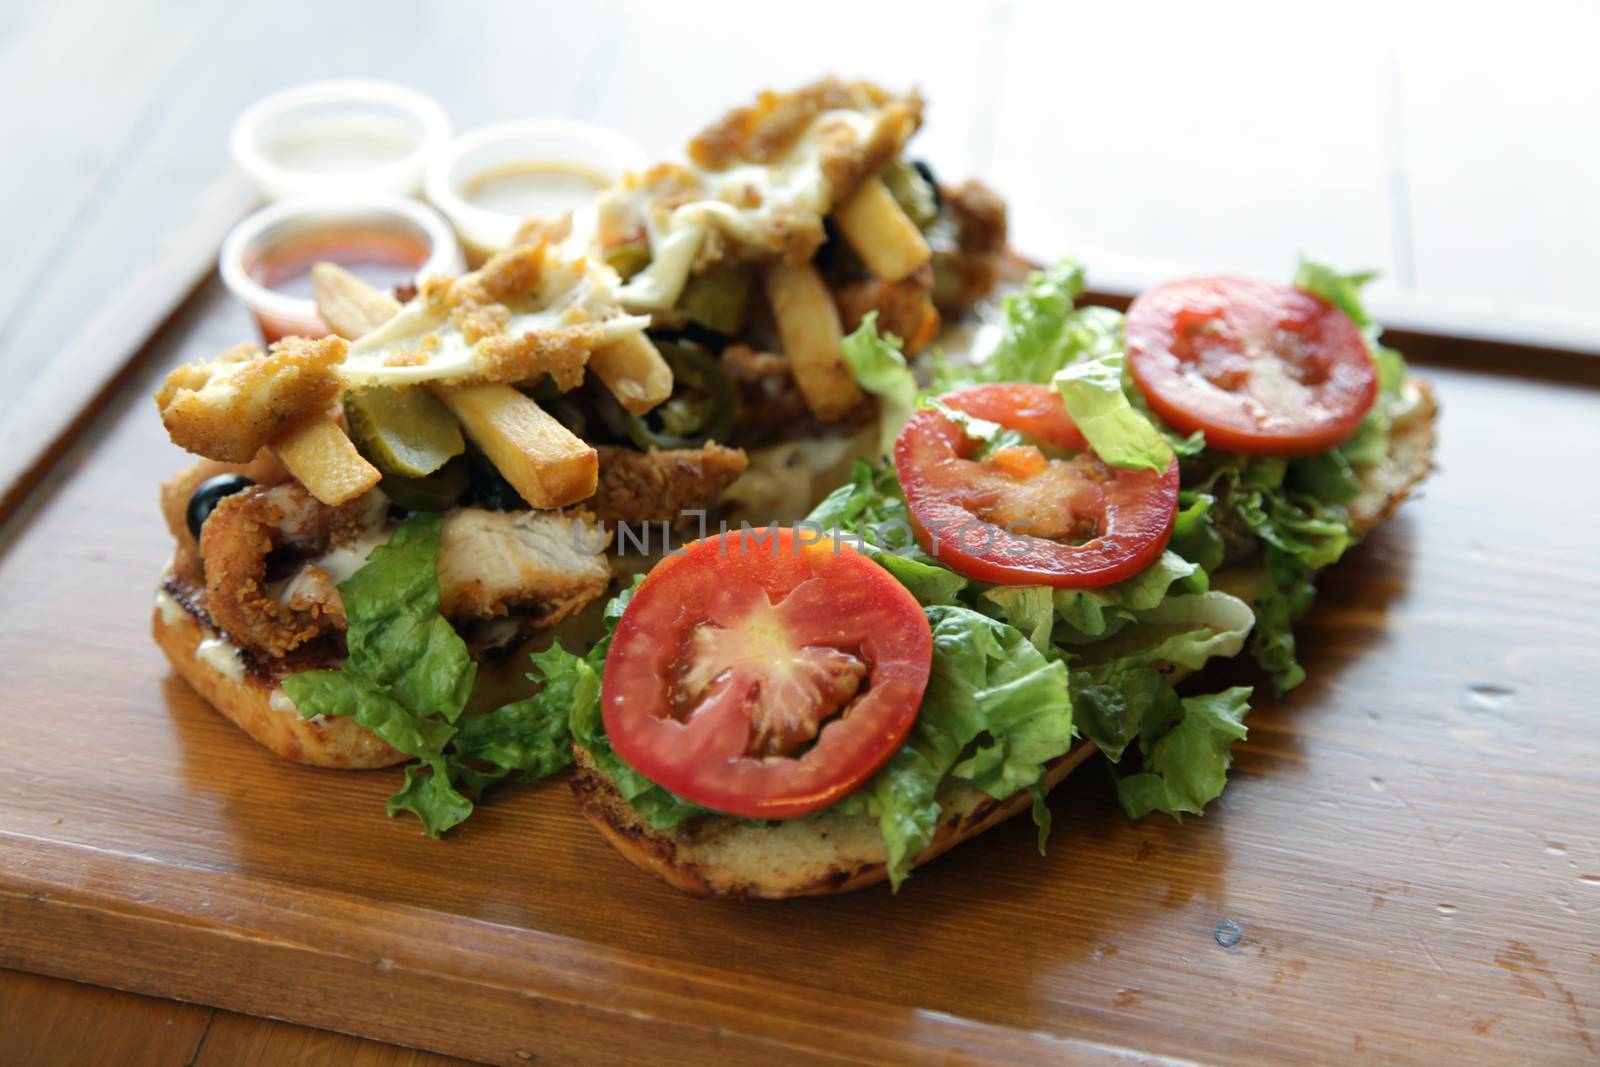 Delicious open face sandwich with sauces by haiderazim